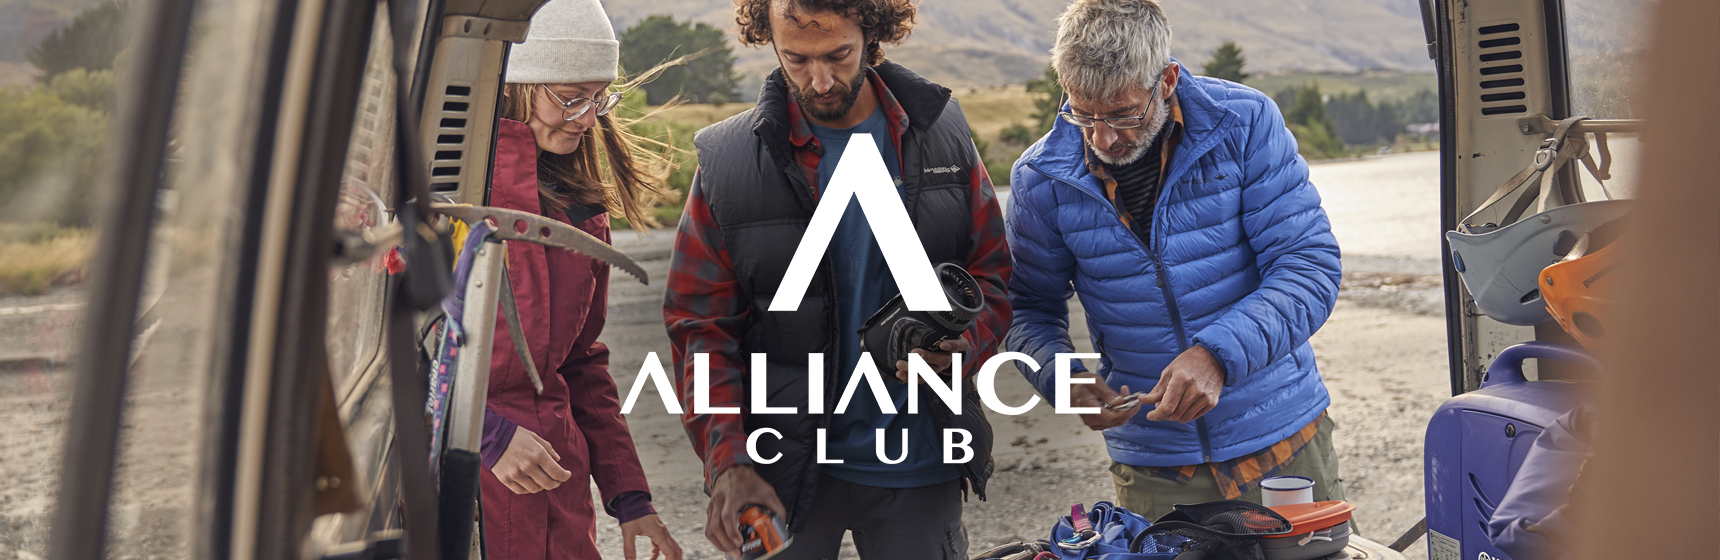 Become An Alliance Club Member Today